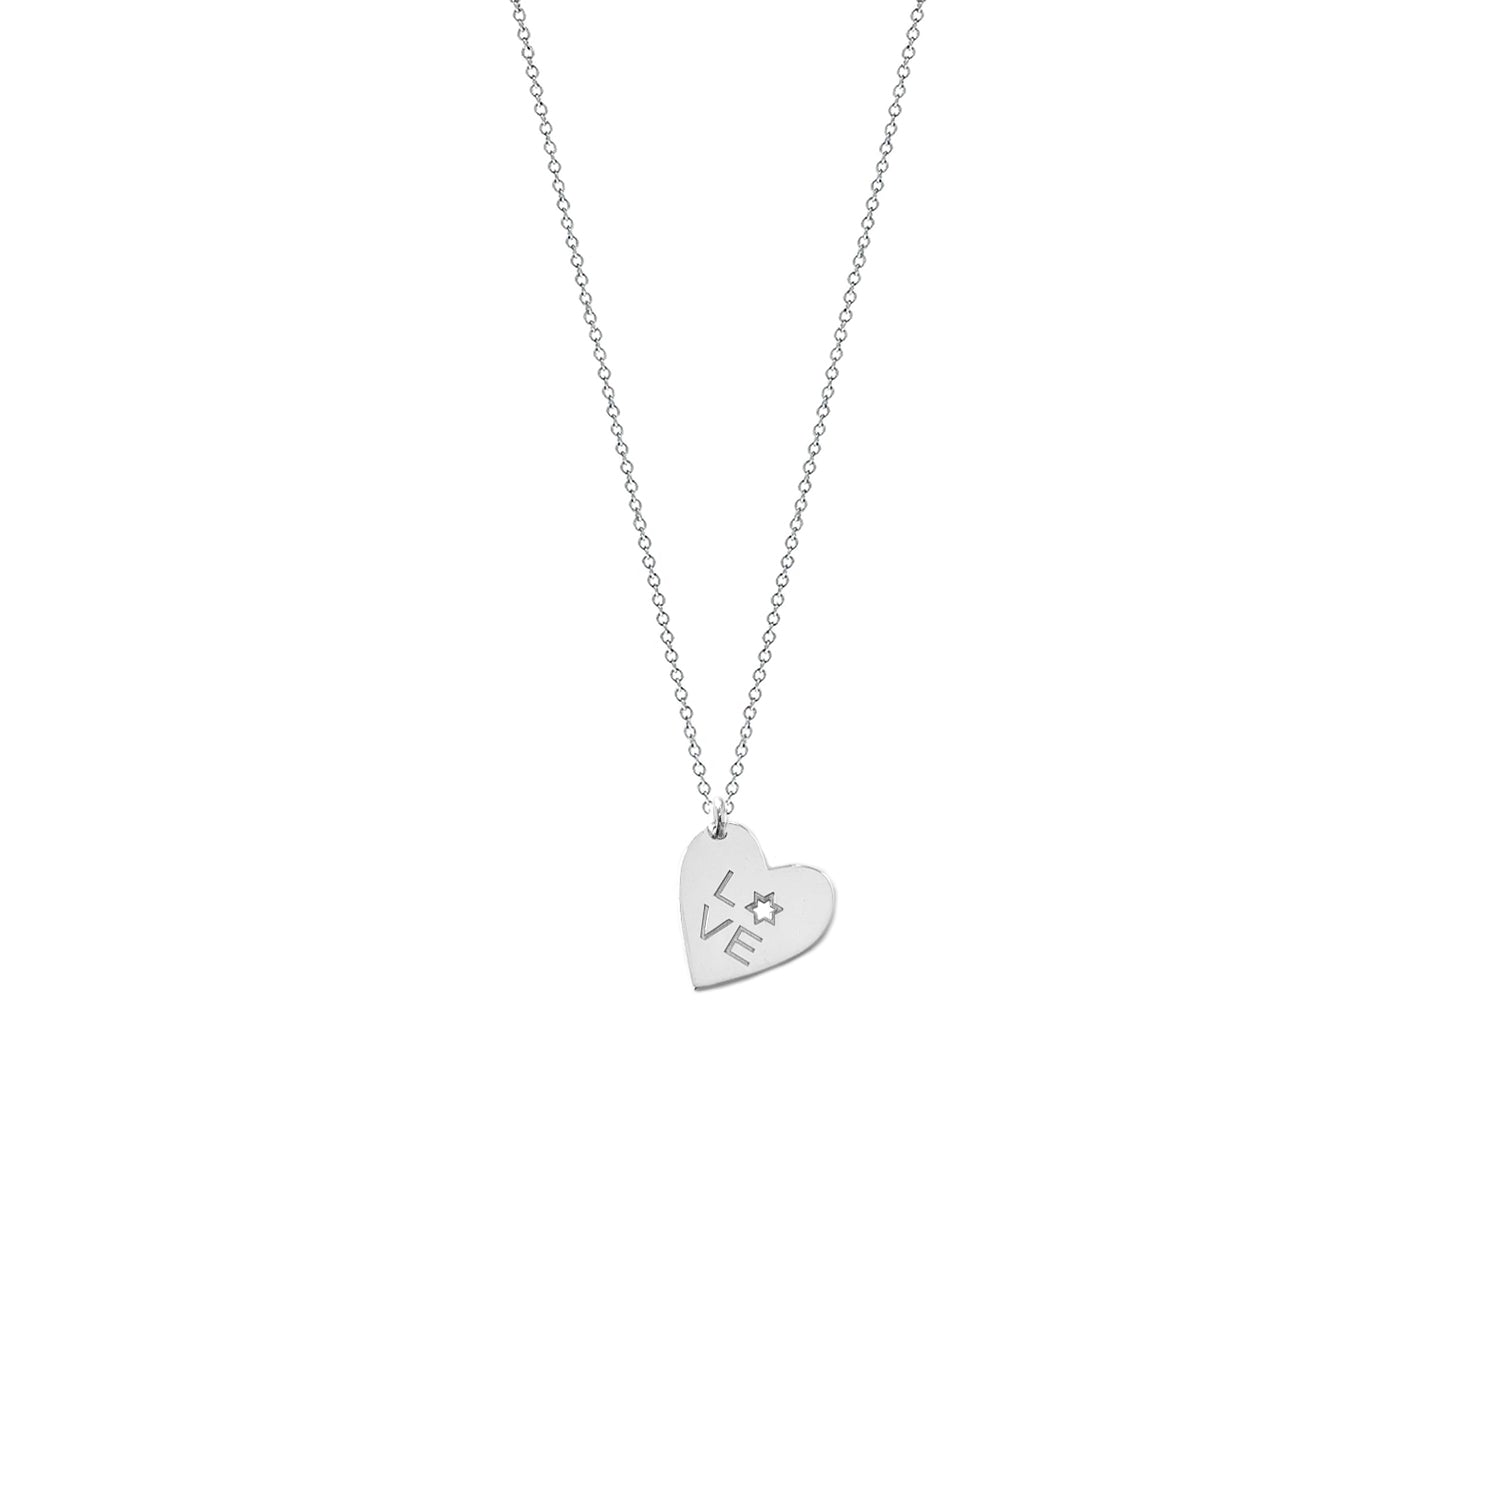 Love Star Necklace